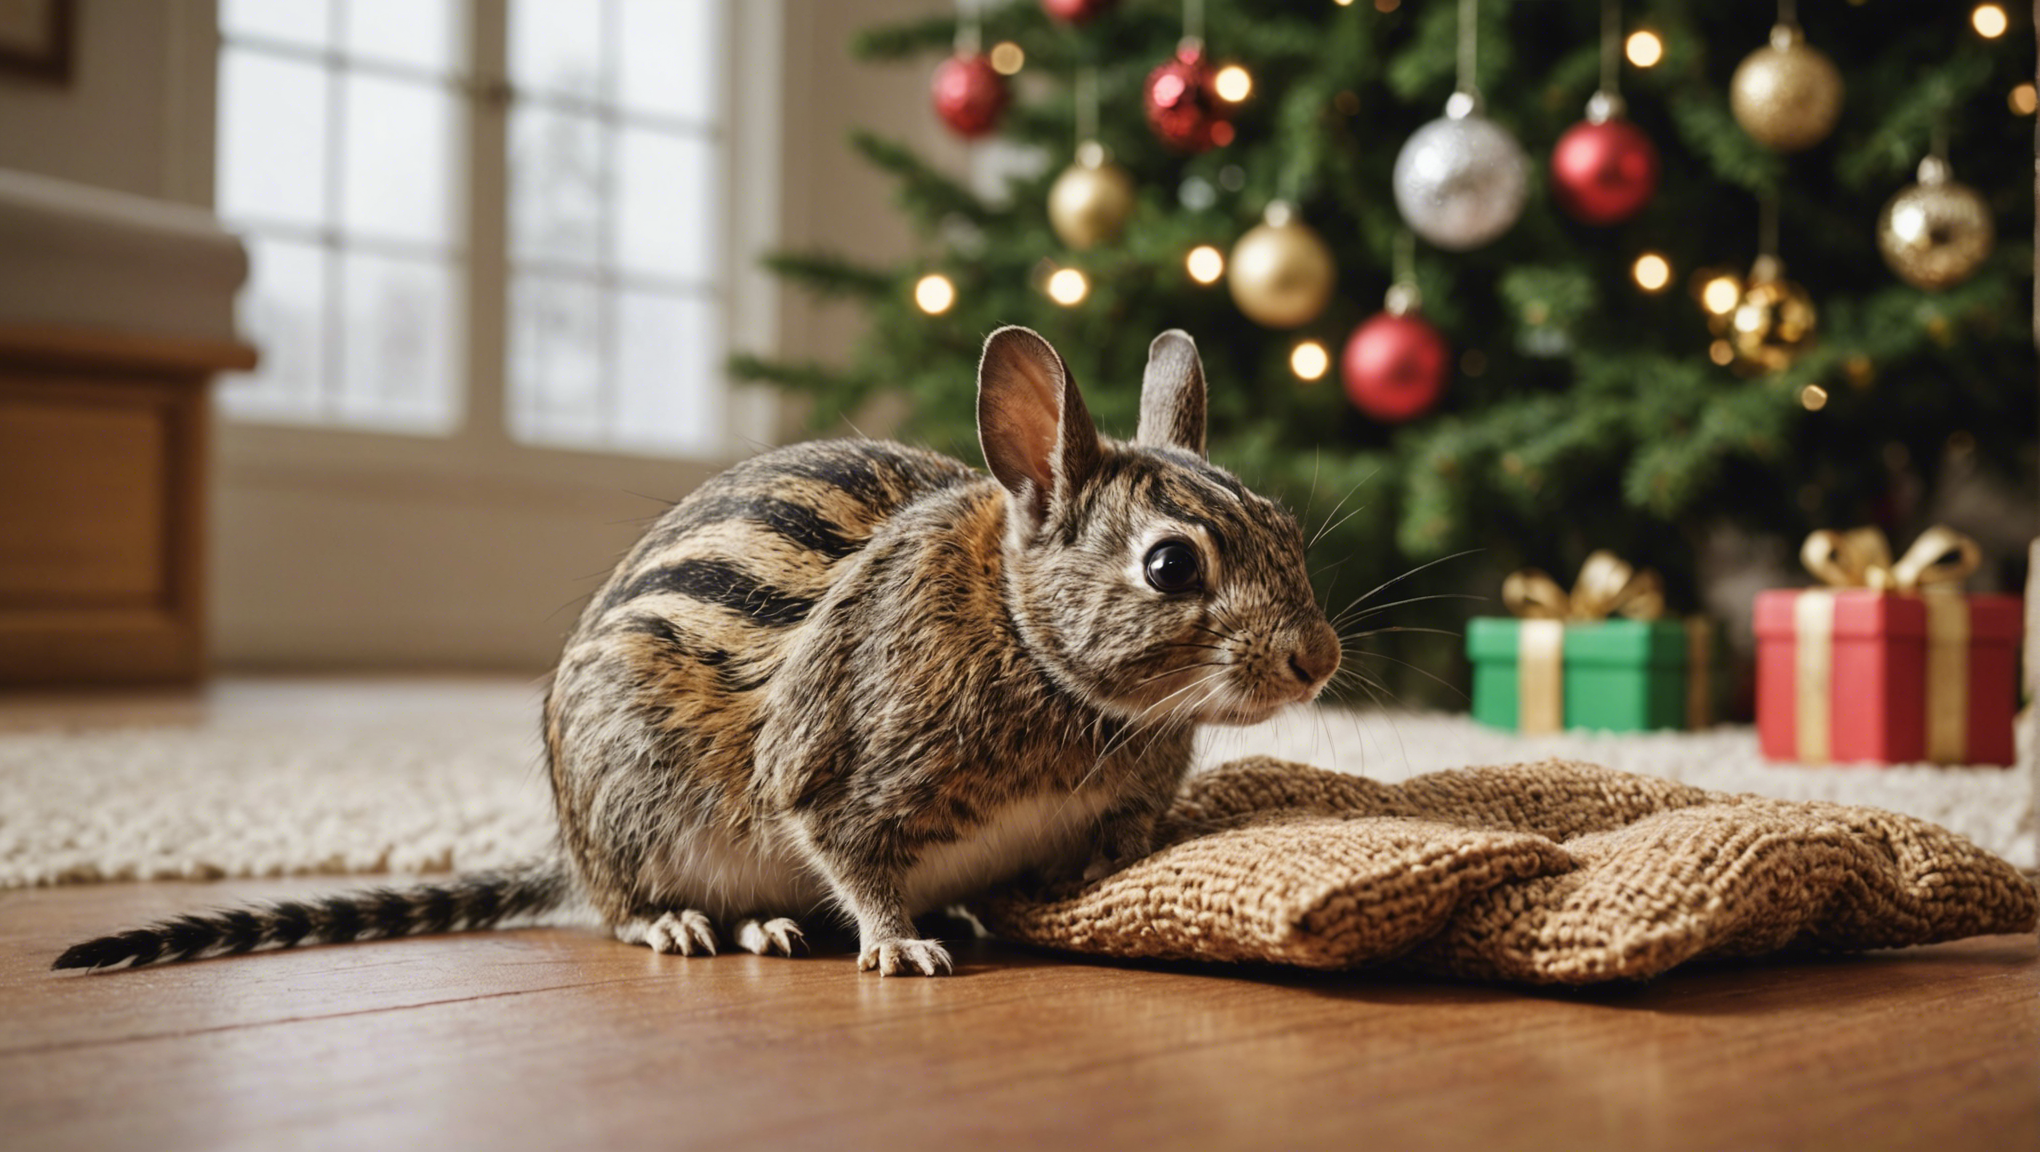 discover effective tips on pest-proofing your home for the holidays to ensure a peaceful and enjoyable time with your loved ones.